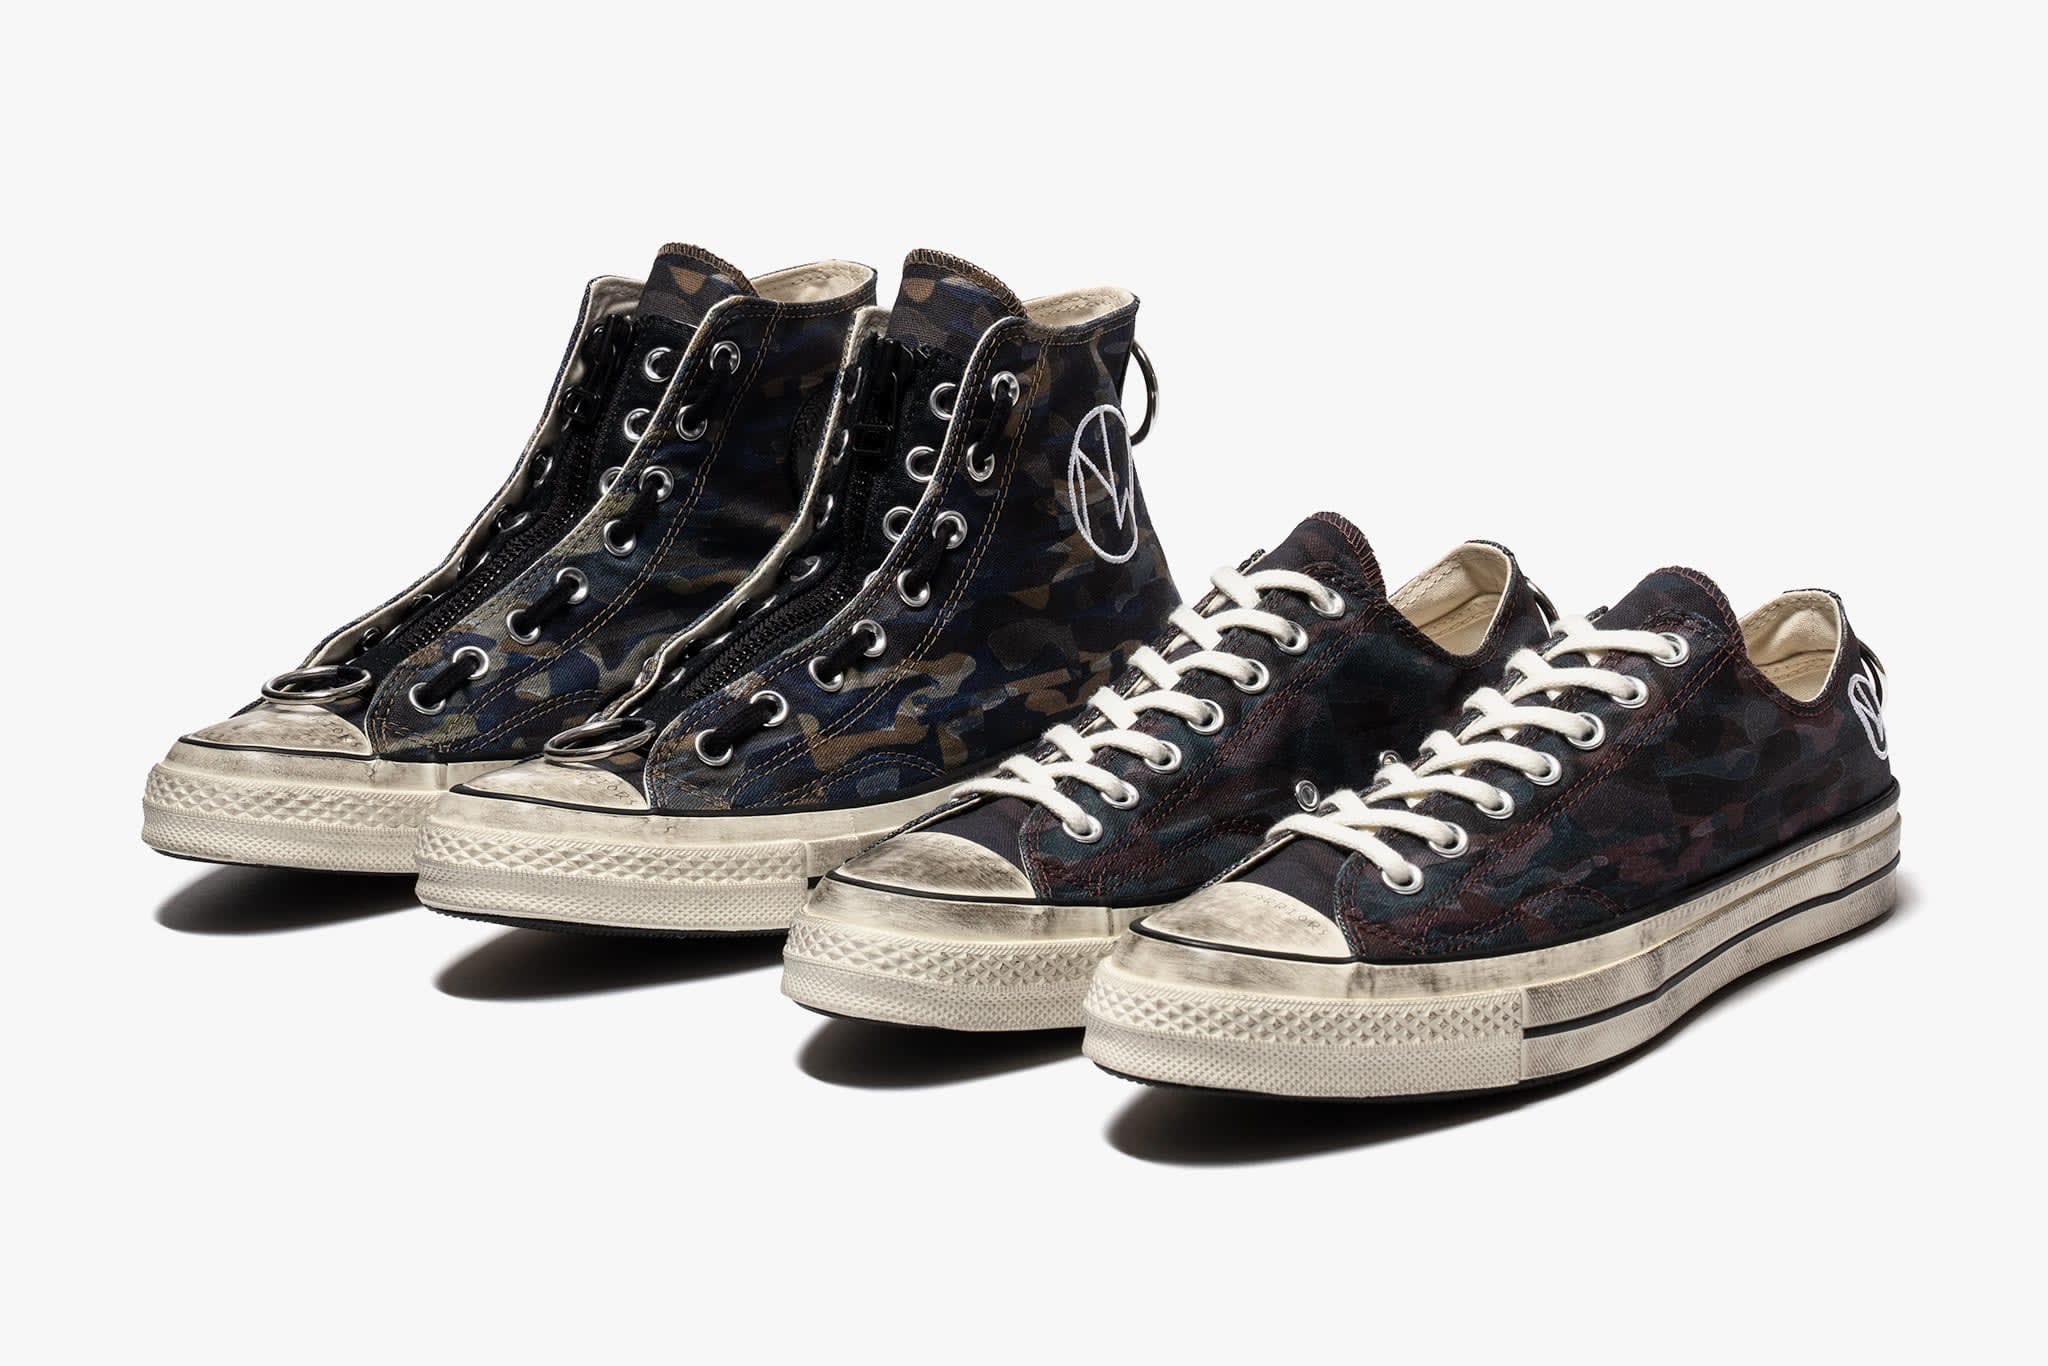 Converse x UNDERCOVER Chuck 70 Ox| Release Date: 11.14.19 | HAVEN